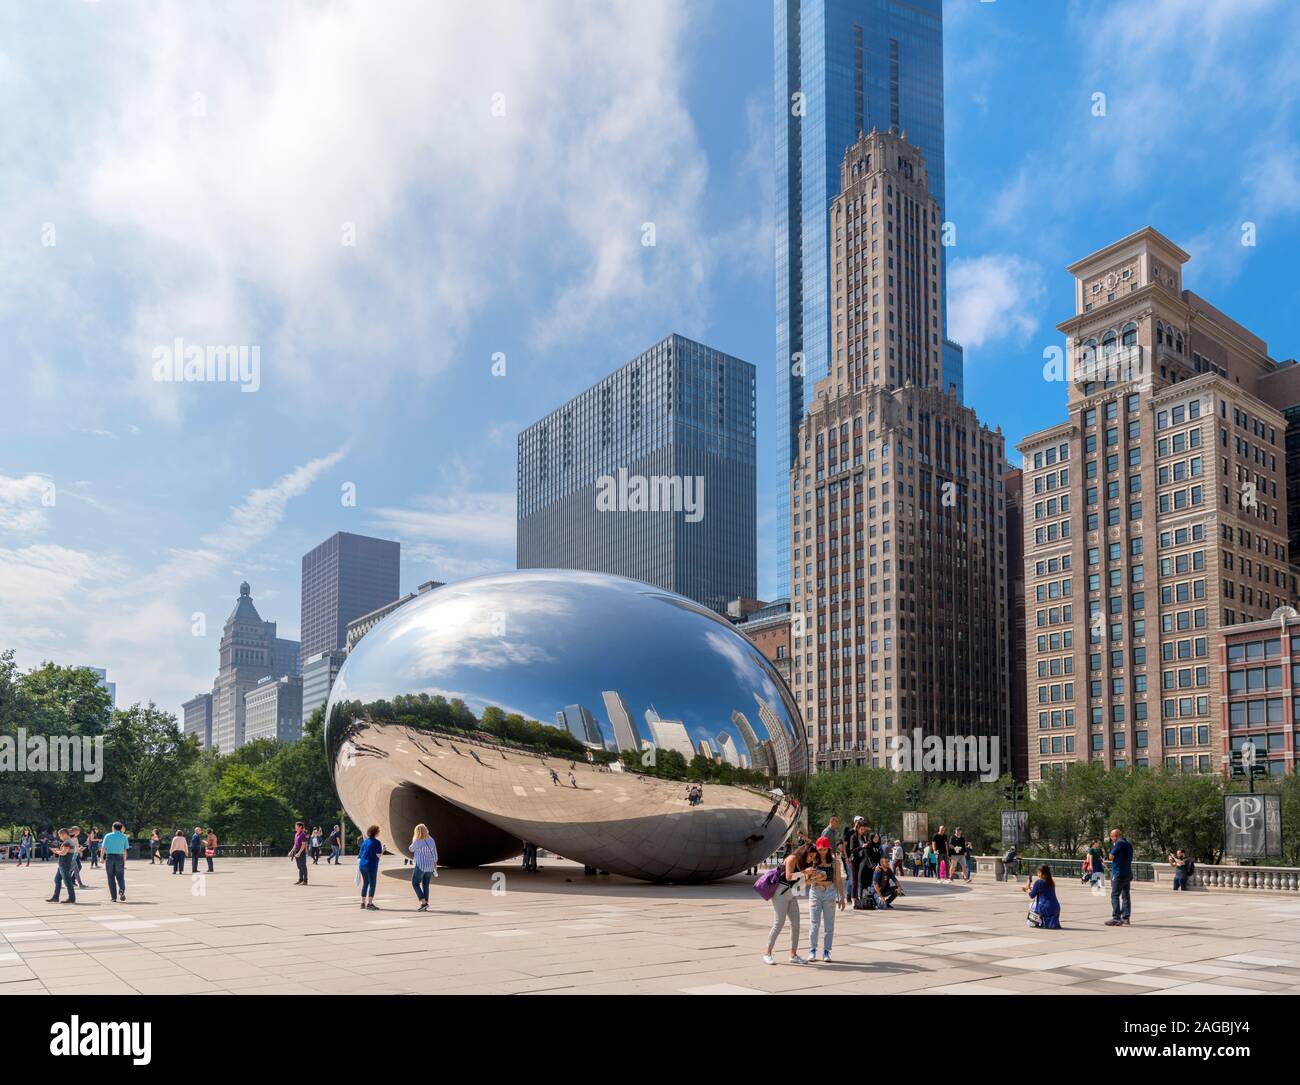 Anish Kapoor's 'Cloud Gate' sculpture in Millennium Park with the downtown skyline behind, Chicago, Illinois, USA Stock Photo